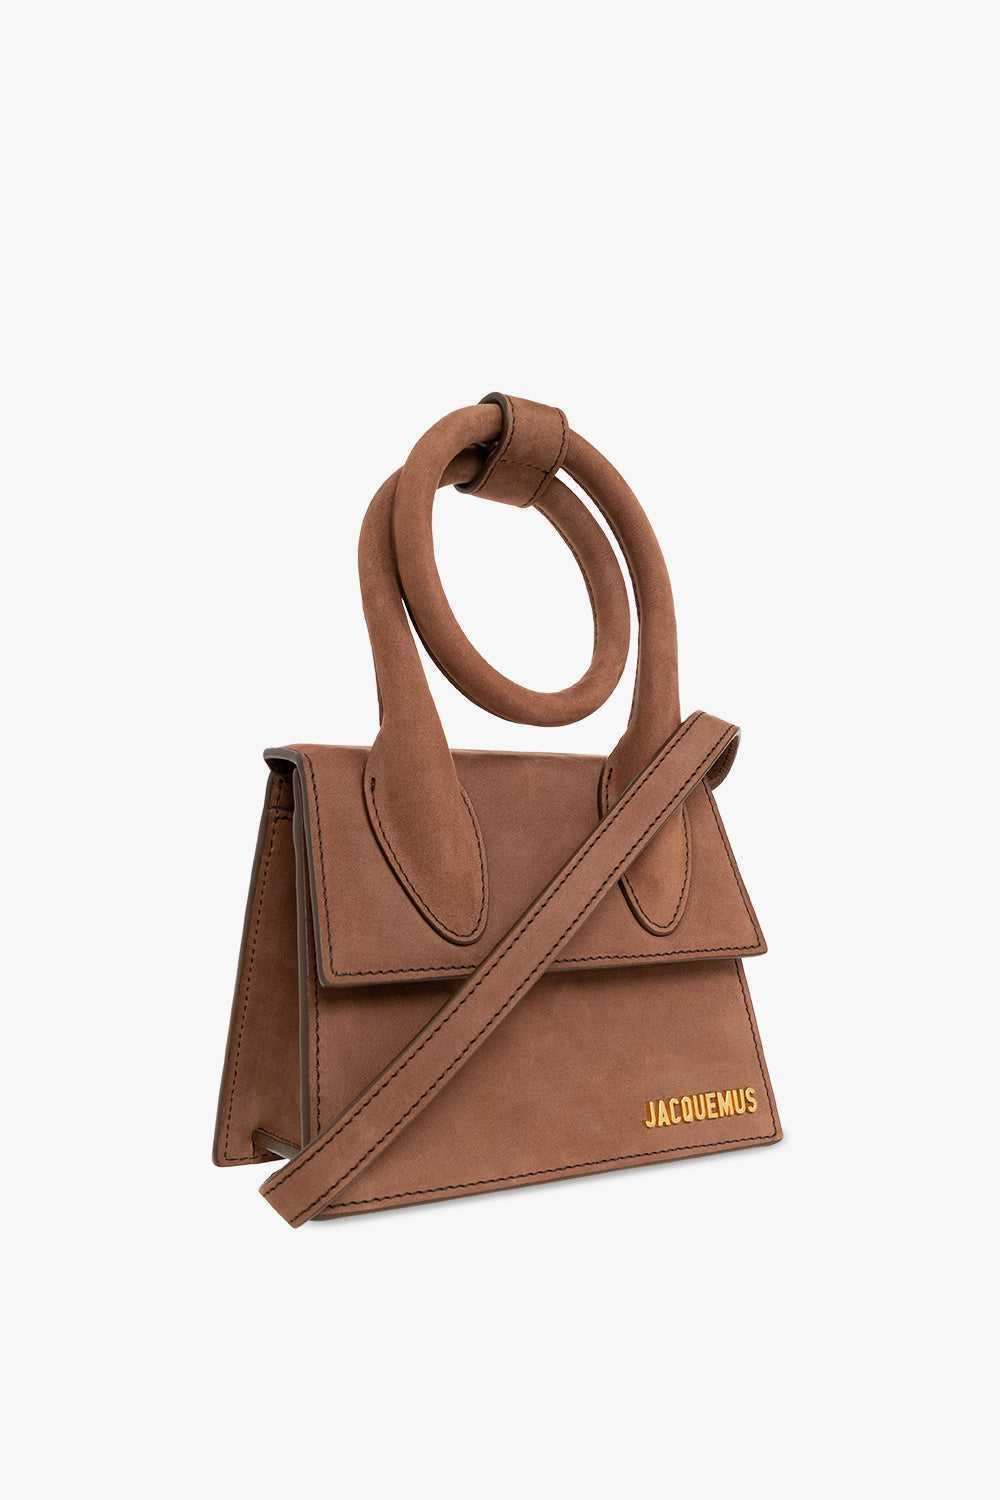 Сумка Jacquemus Le Chiquito Noeud Suede Brown